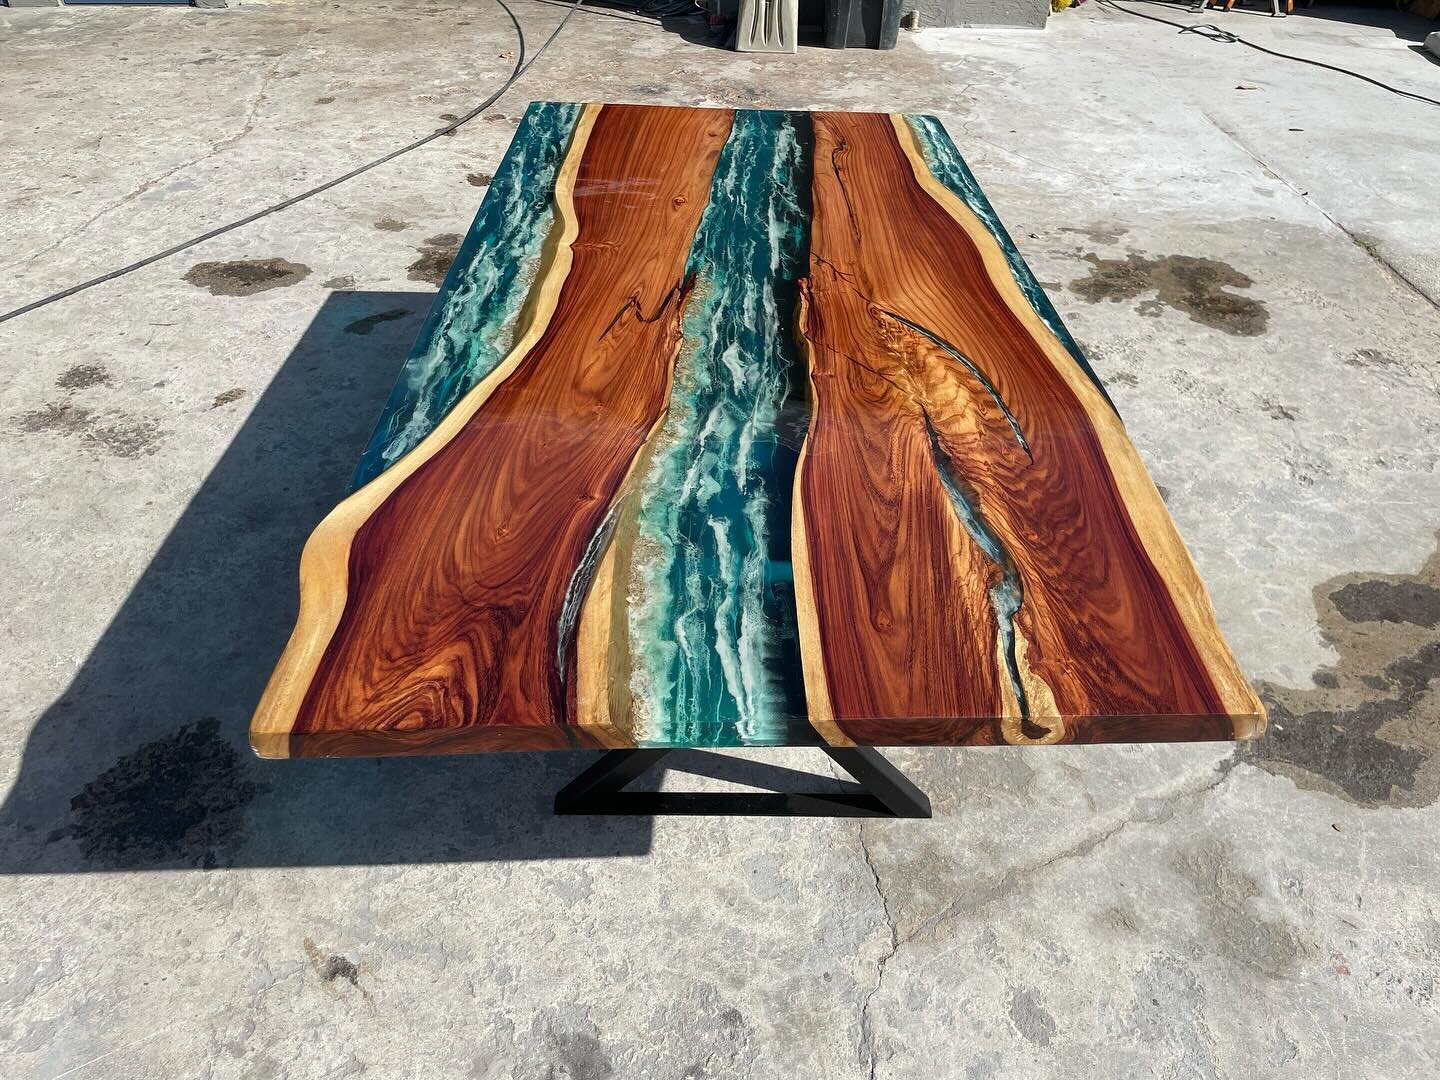 Finally completed! 10 weeks of perfecting this ocean themed table. 3 epoxy rivers added with crushed sea shells and multiple blue dyes. Waves were all done by hand on different levels. Top coat is a clear glossy polyurethane. It makes the clear and b